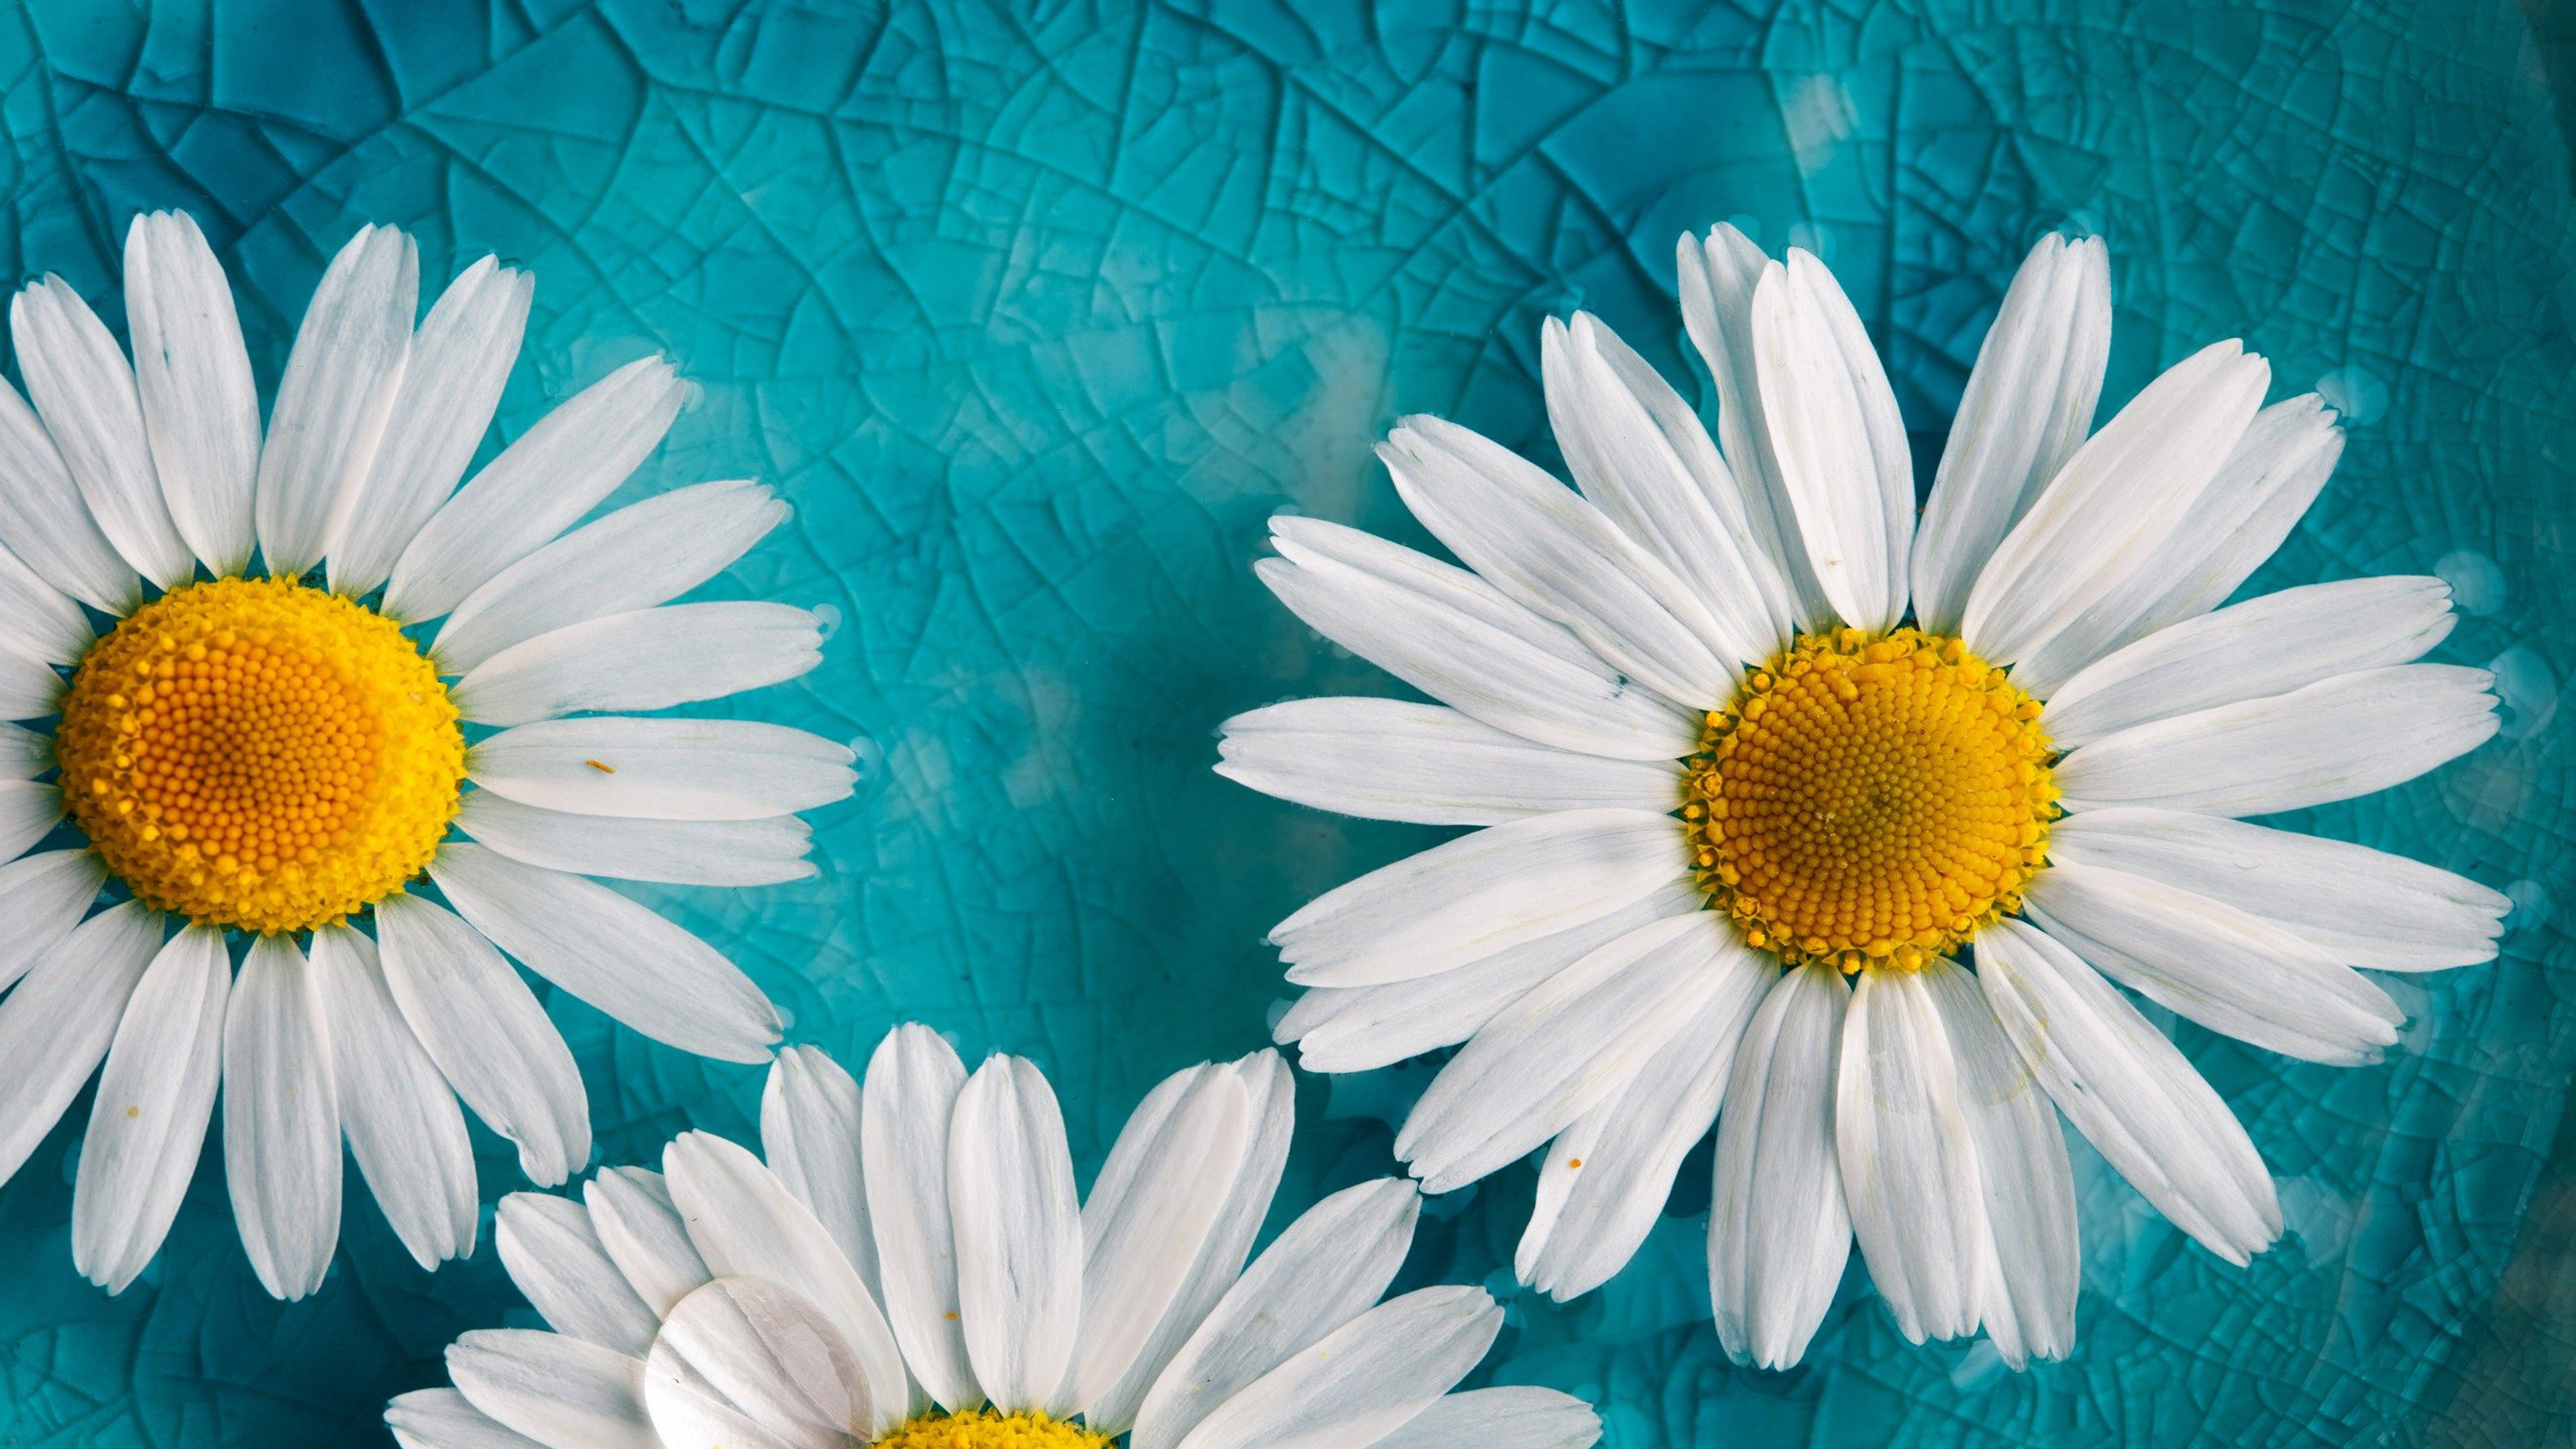 Yellow White Flowers Blue Cracked Glass Hd Wallpaper Download For Mobile :  